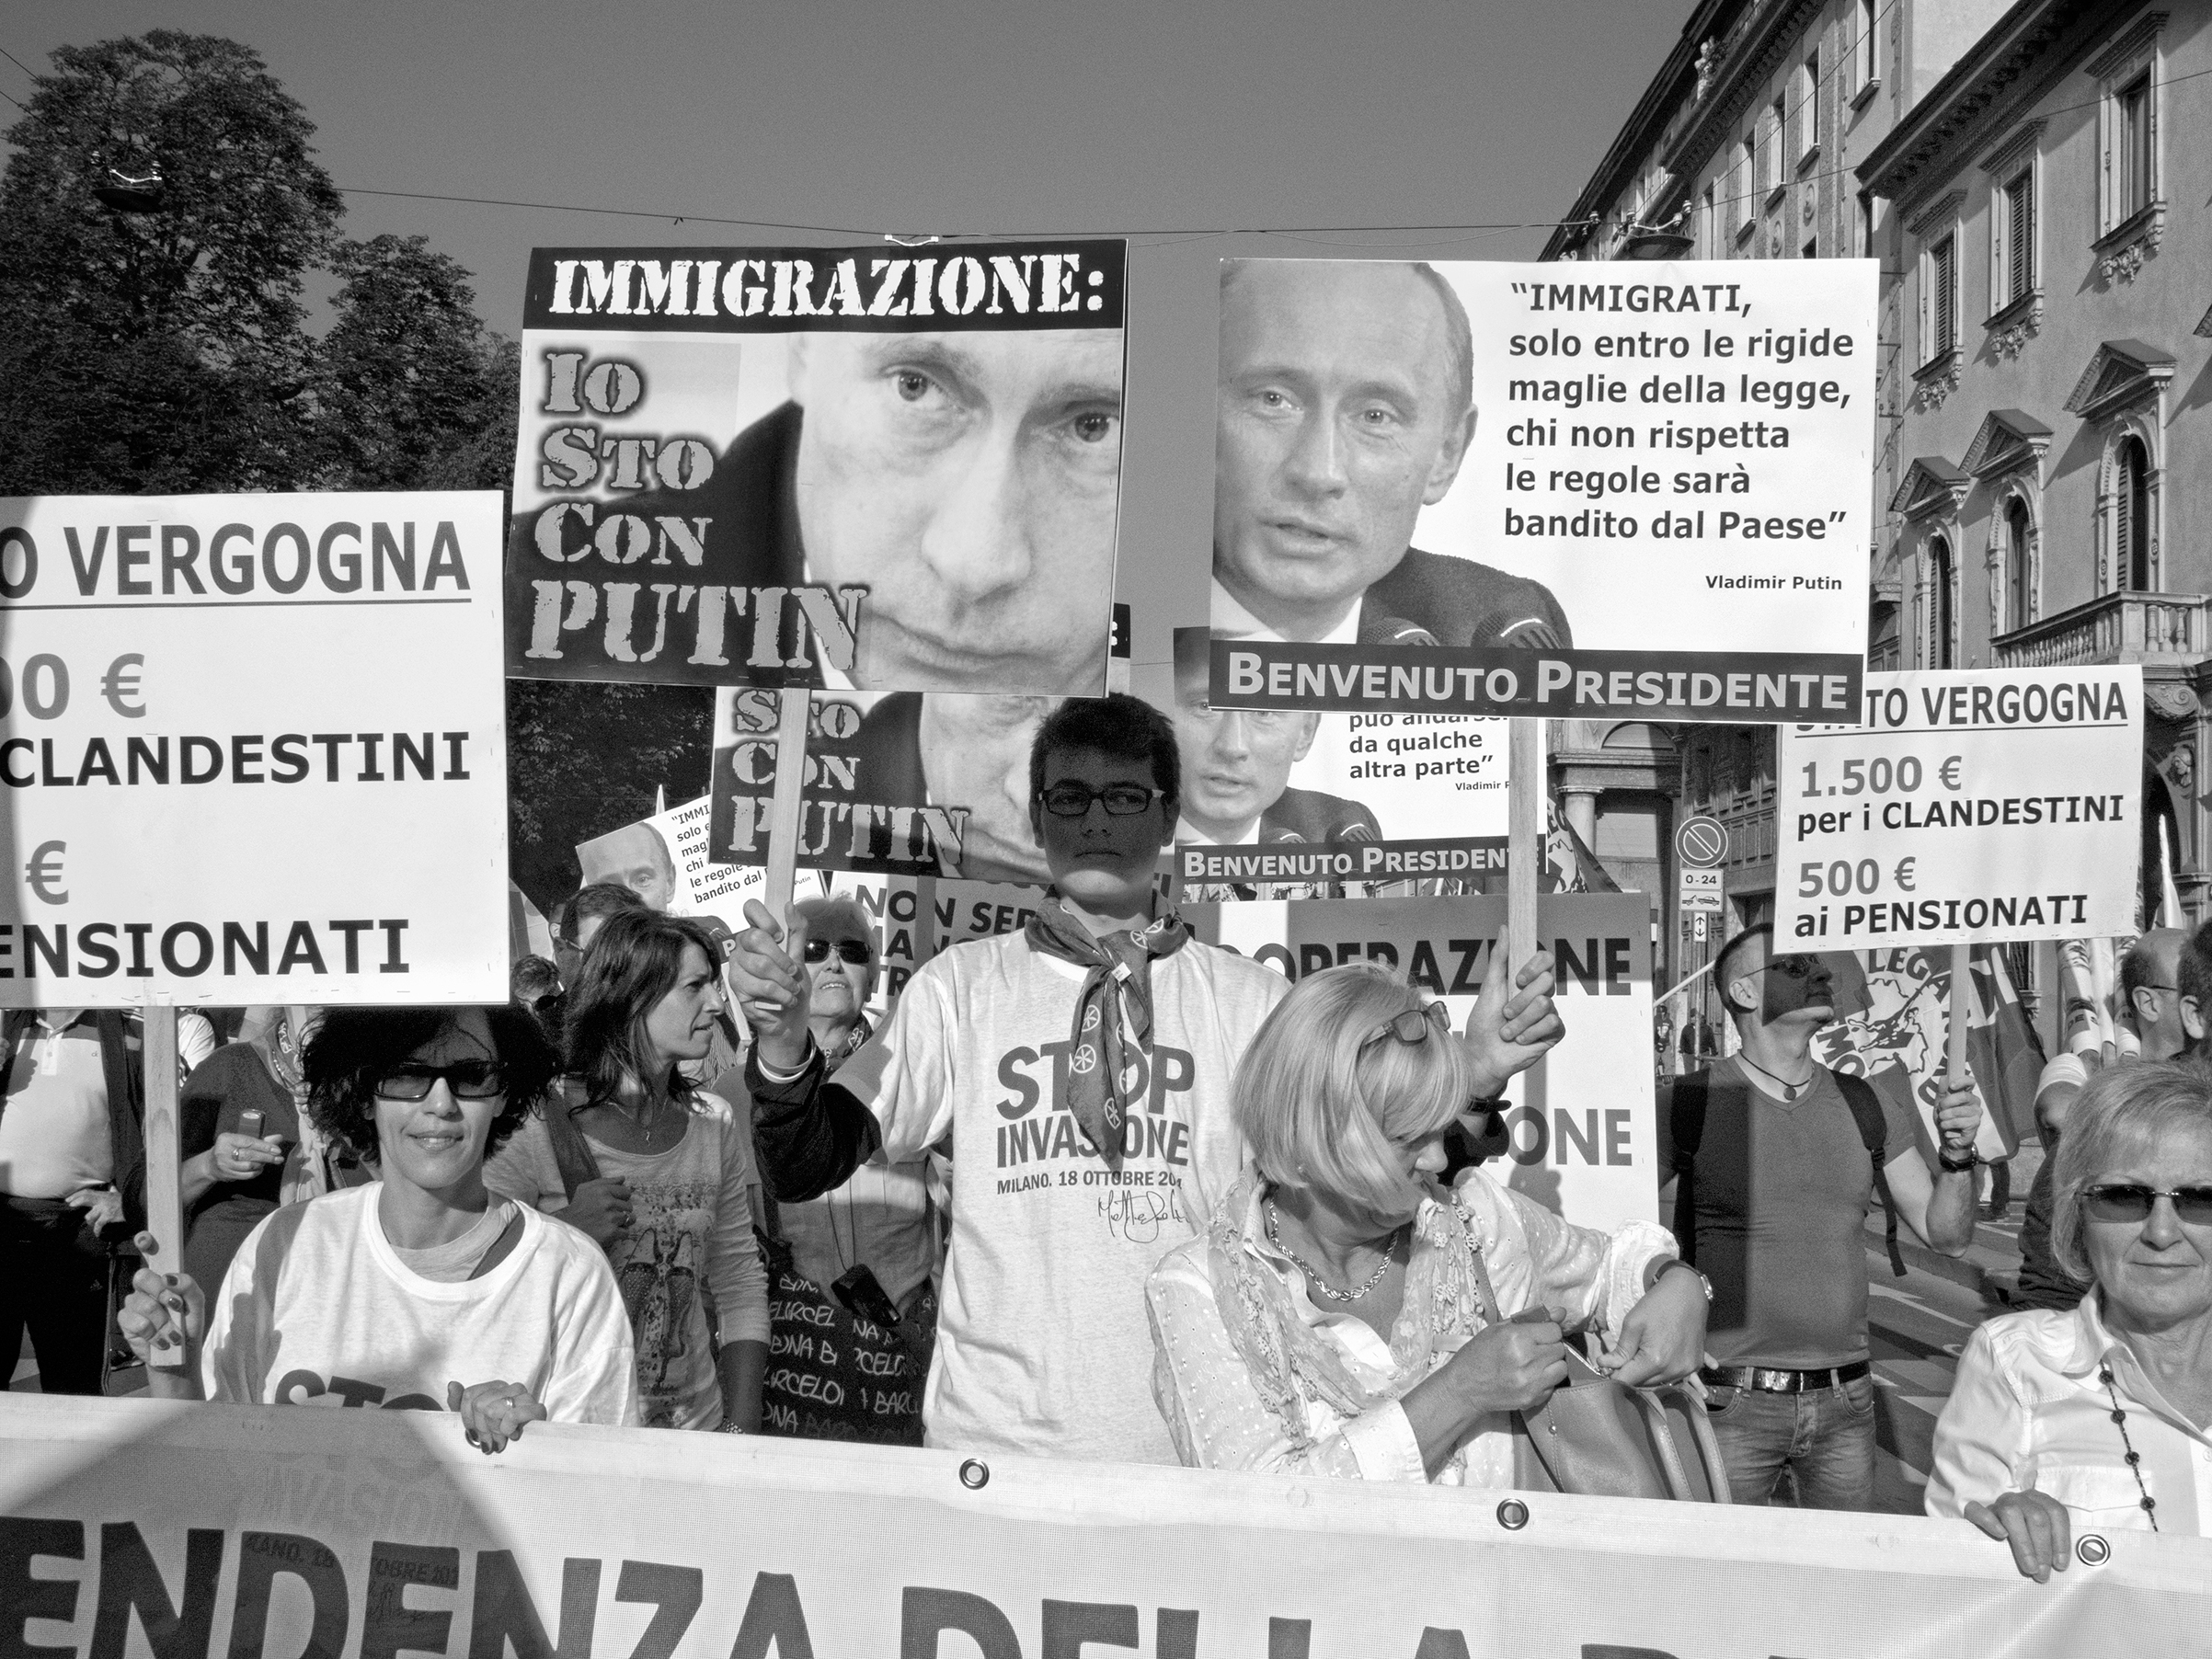 Supporters of the then Northern League rally against an immigrant “invasion” in Milan in October 2014 (Marco P. Valli—Cesura)